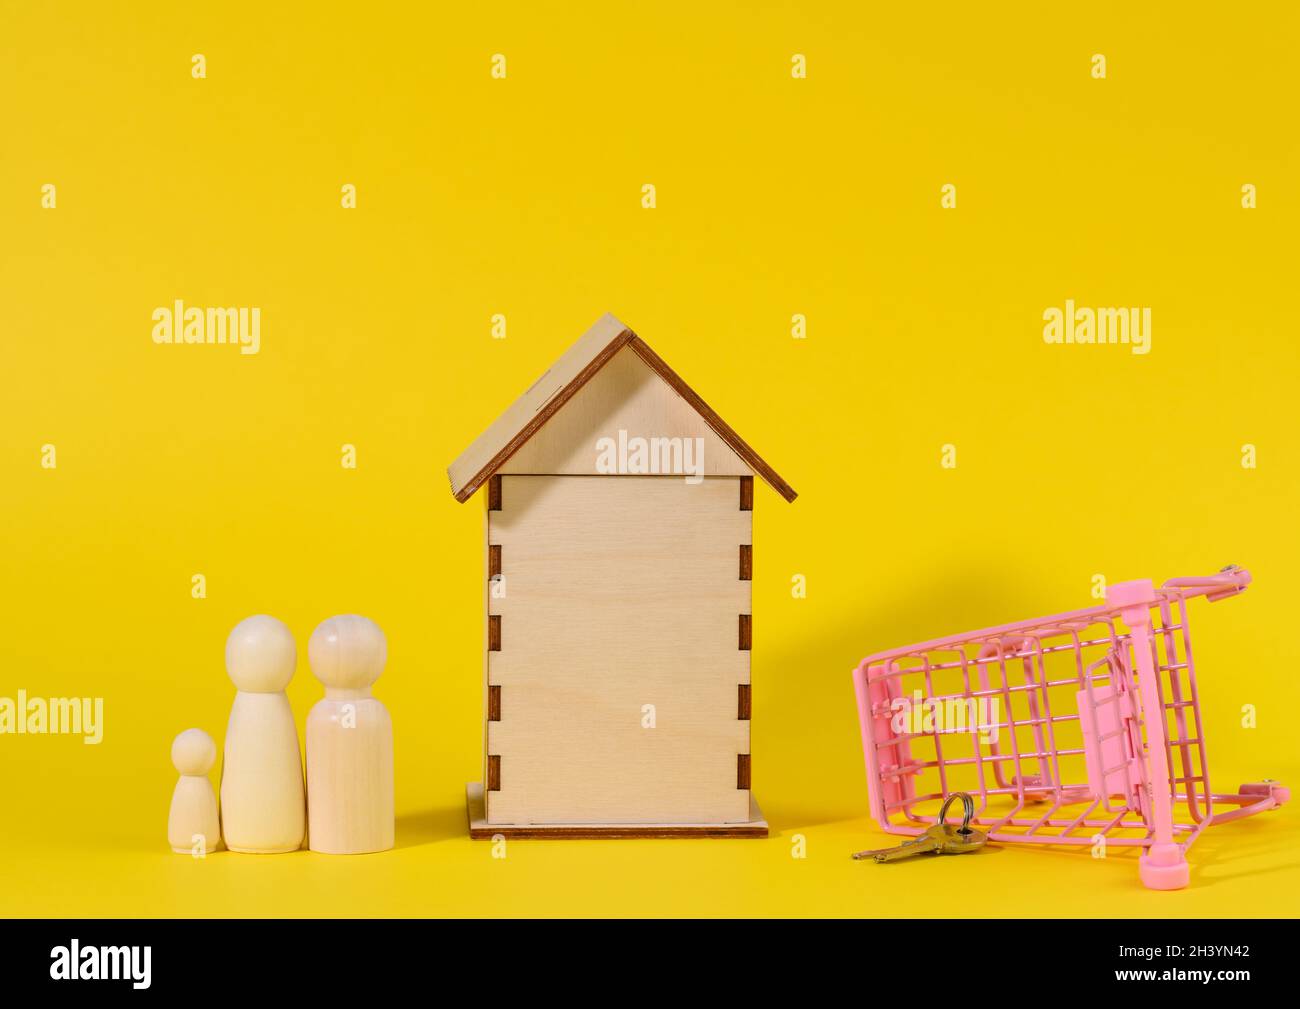 Wooden house and metal miniature cart on a yellow background. Real estate purchase concept Stock Photo